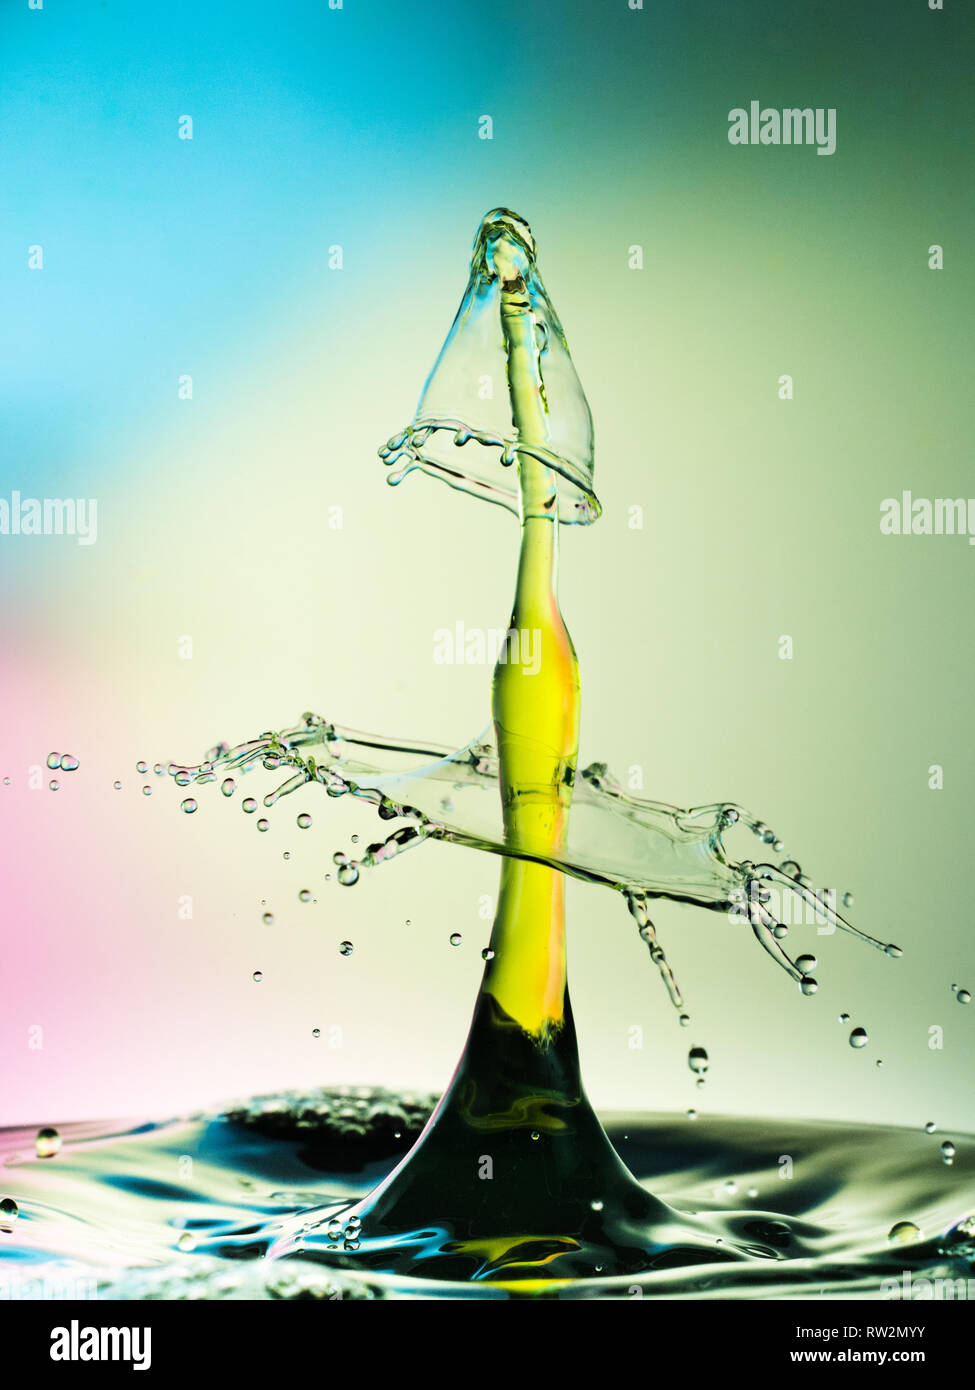 Extreme close-up image of splash, drop collision with abstract look Stock Photo